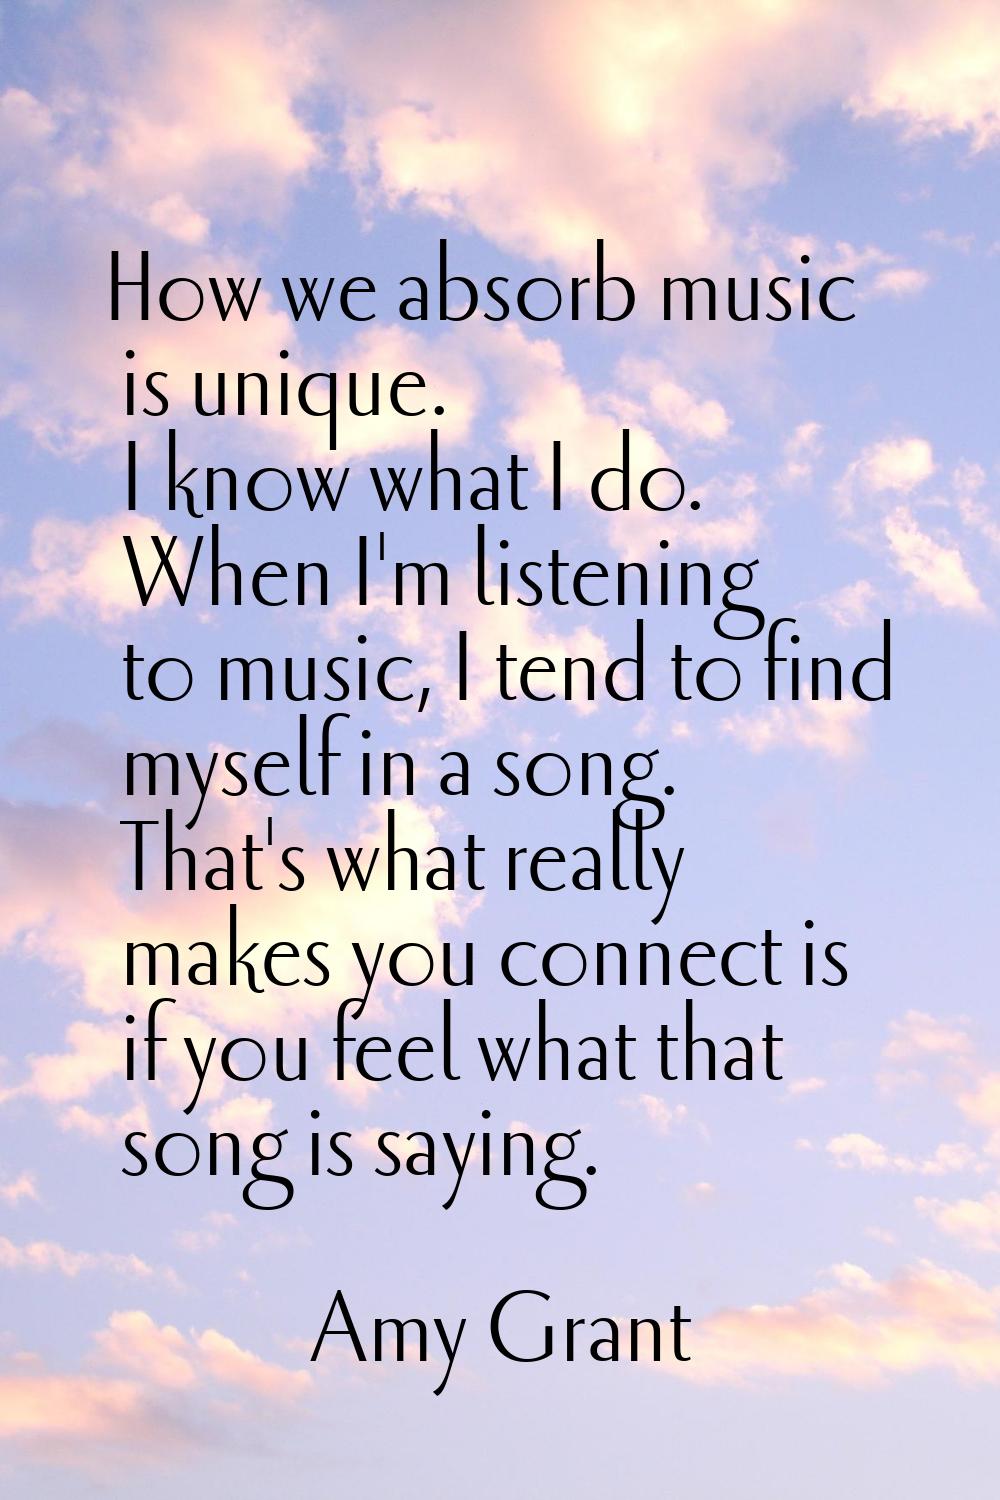 How we absorb music is unique. I know what I do. When I'm listening to music, I tend to find myself